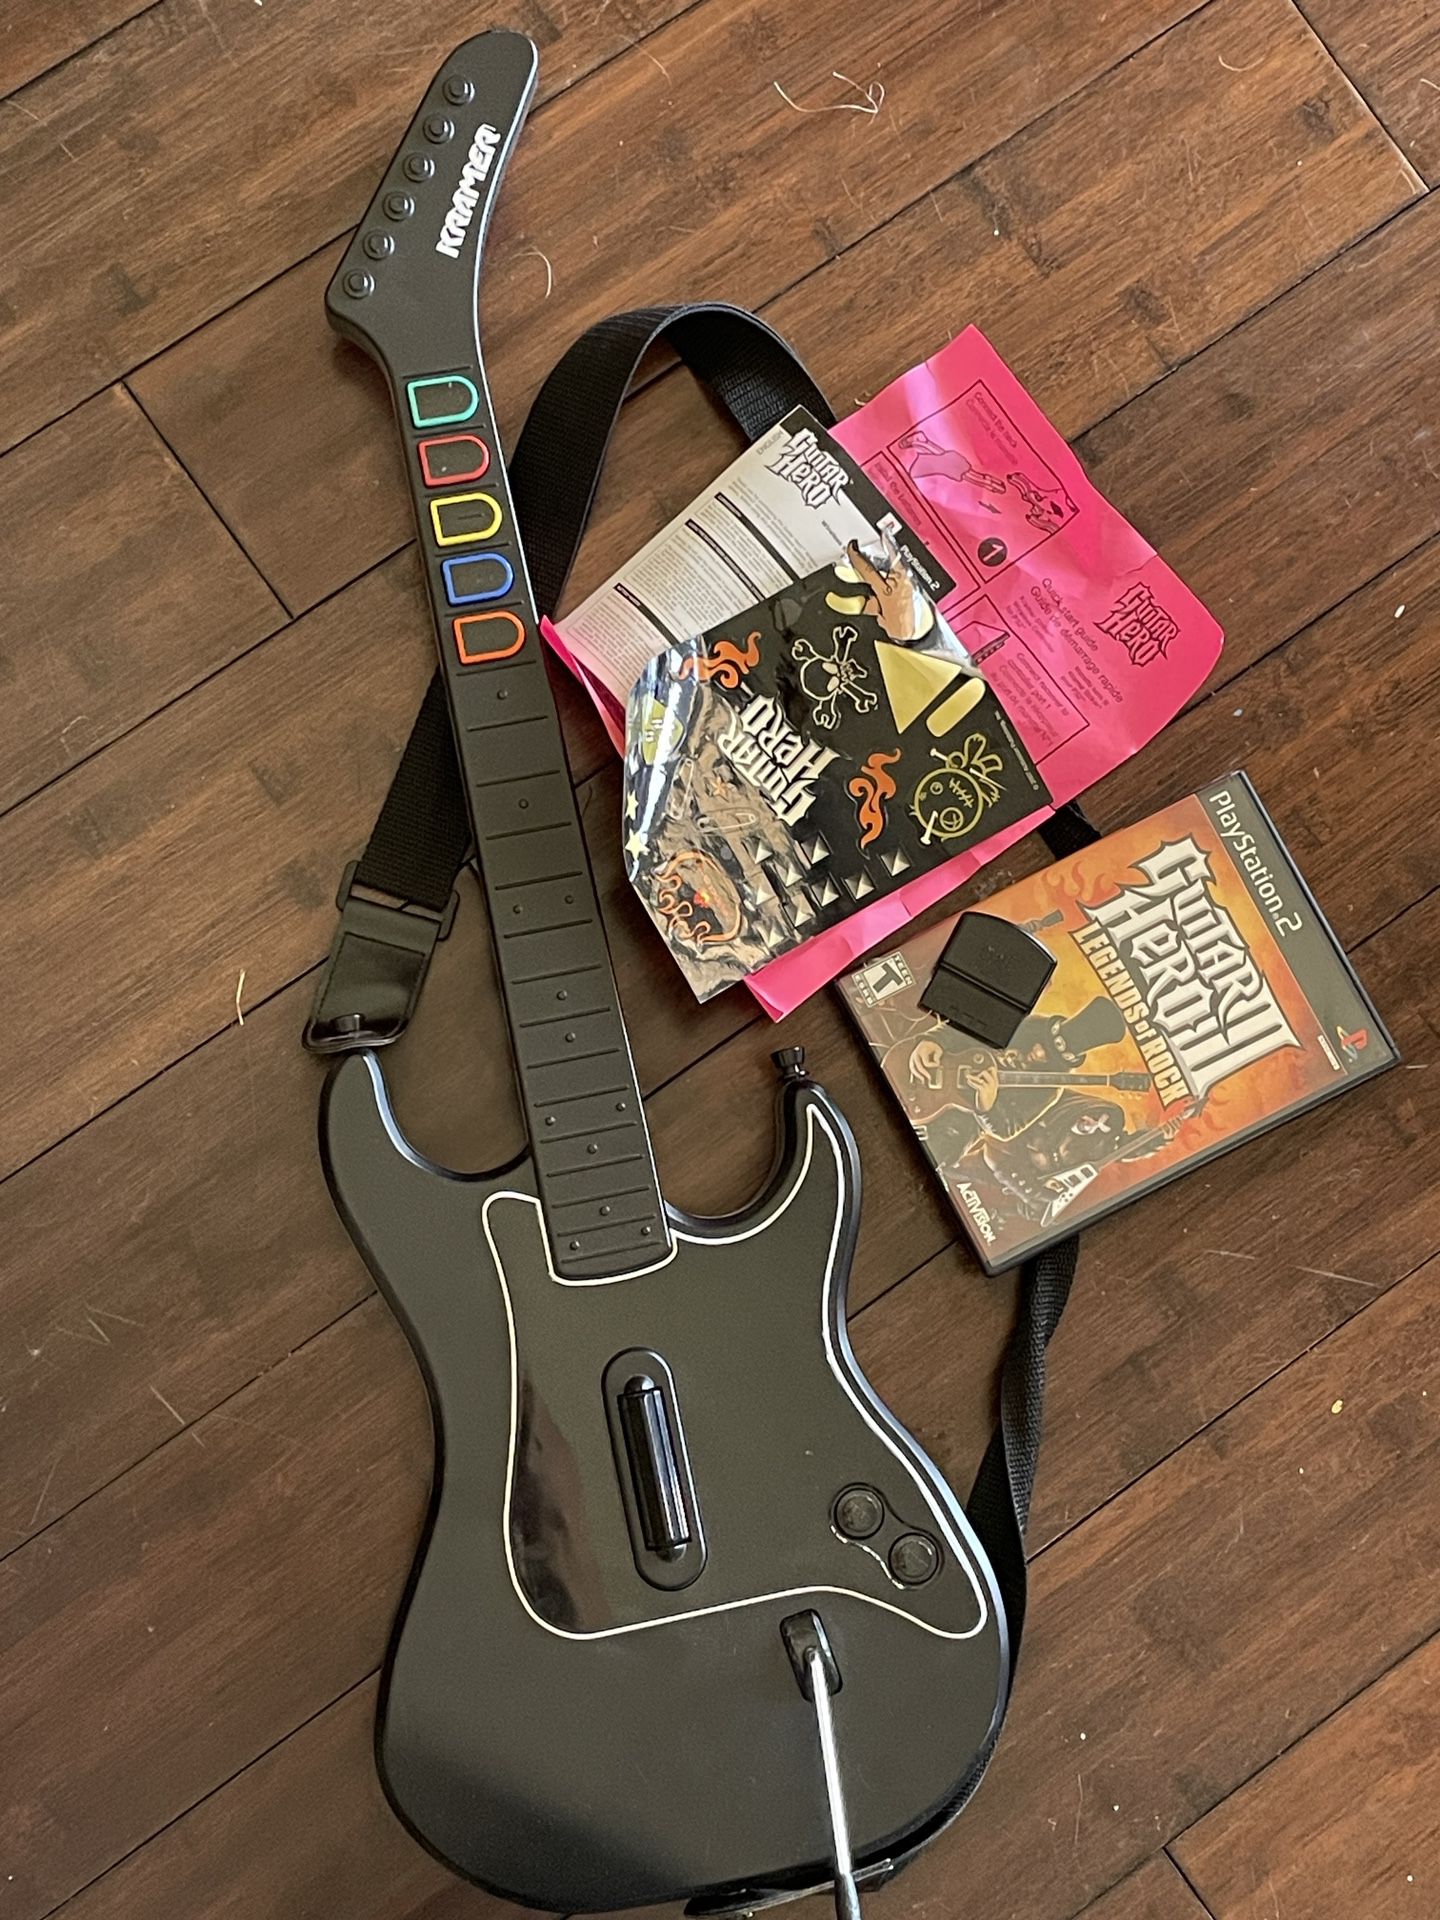 Play Station PS2 -Guitar Hero game And Guitar